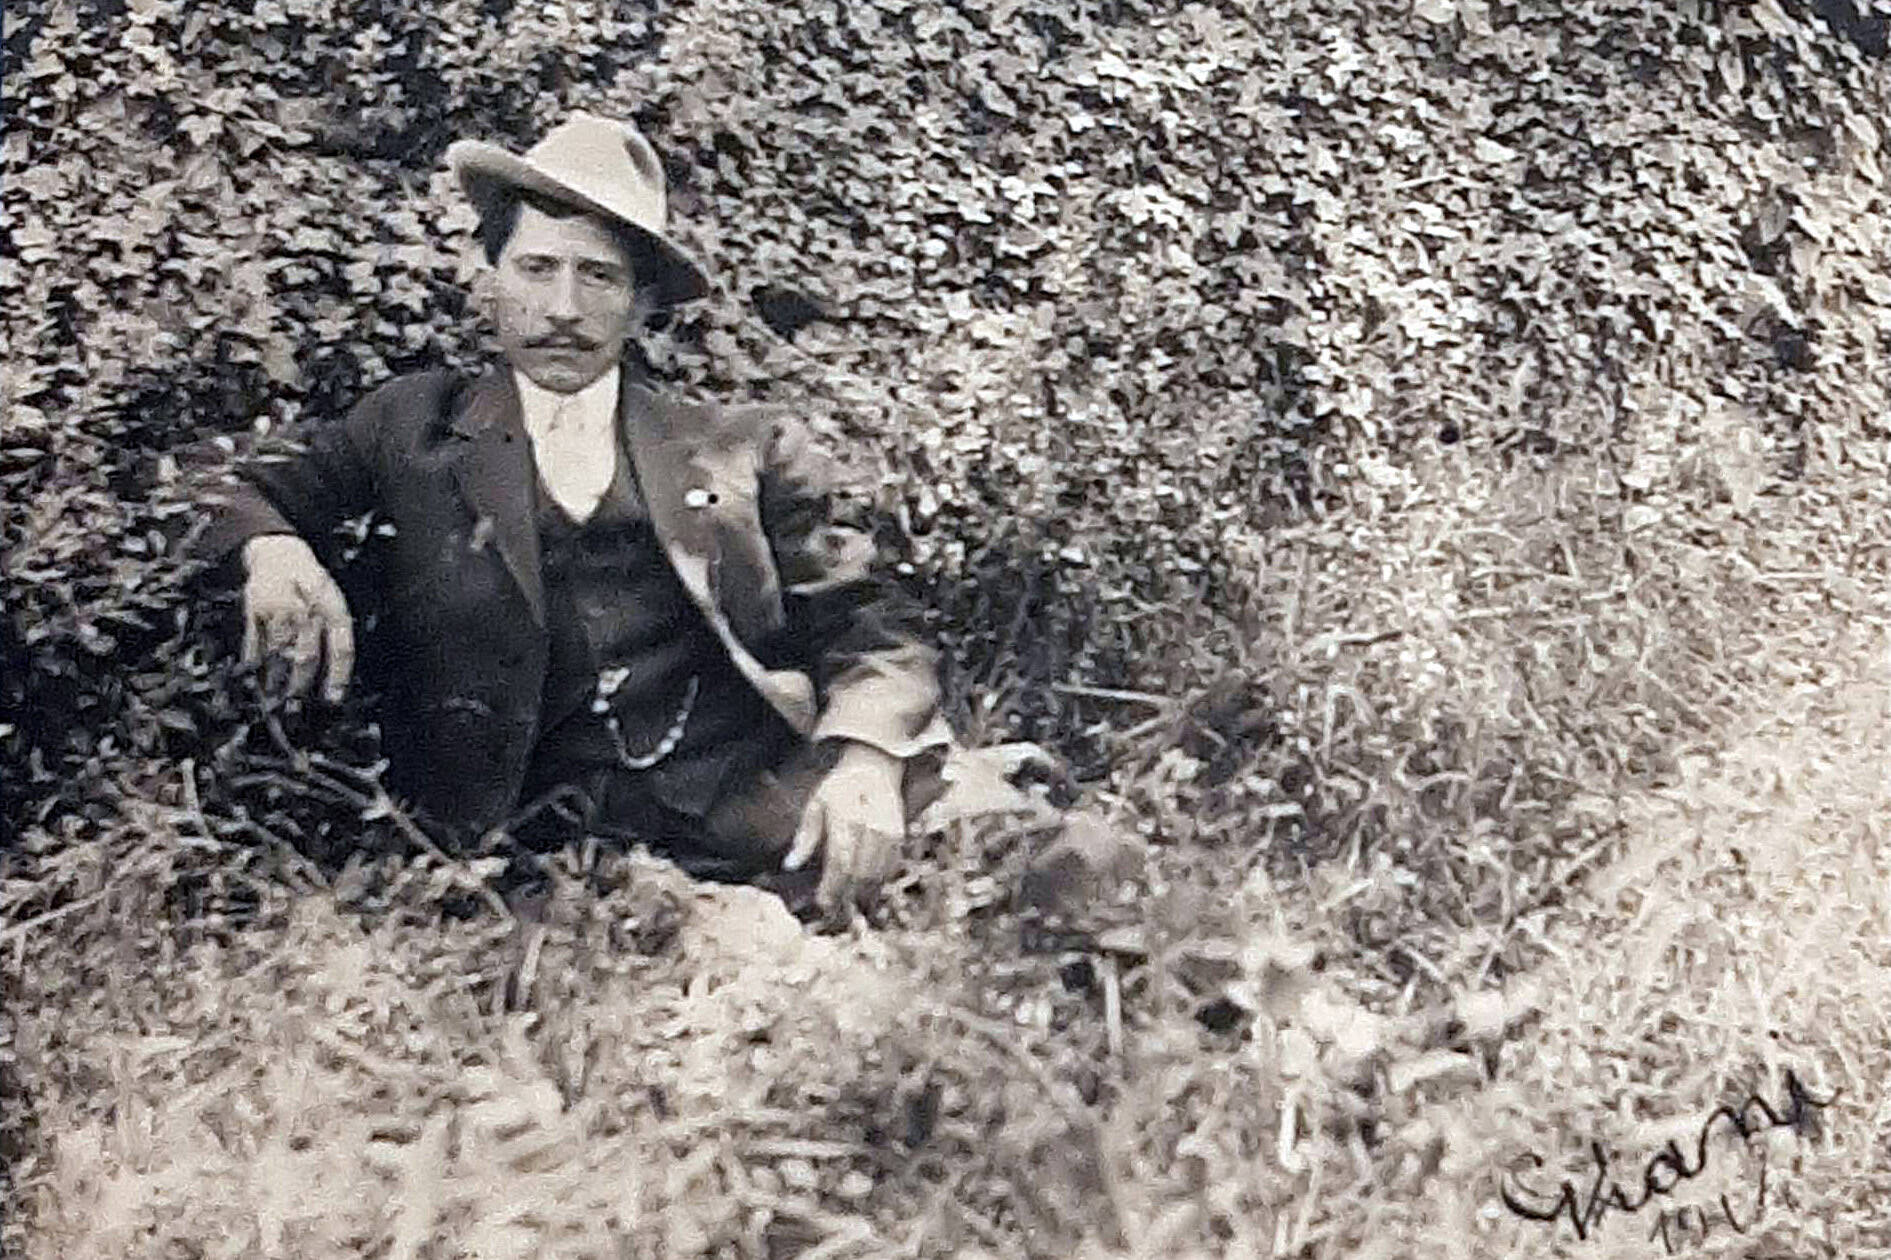 Eventually, all but one of Frenchy’s siblings would live for a time in the United States. Carlo Viani, pictured here in the early 1900s, also spent some time in Alaska. (Photo courtesy of the Viani Family Collection)